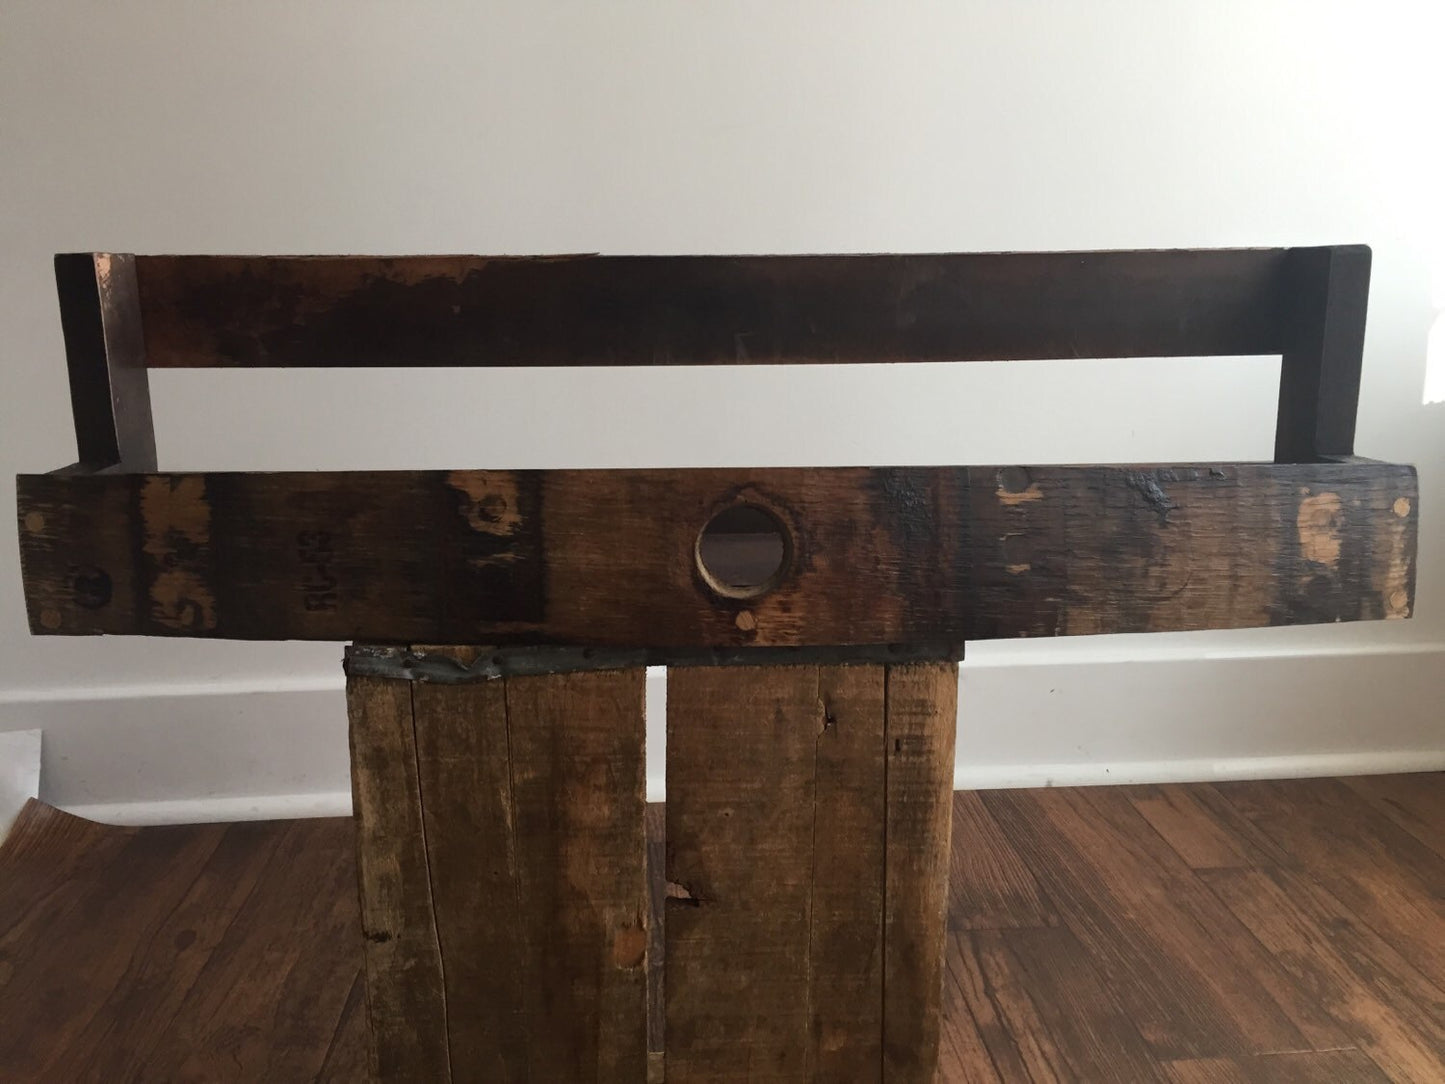 Bourbon/Whiskey Barrel Shelf with The Bung